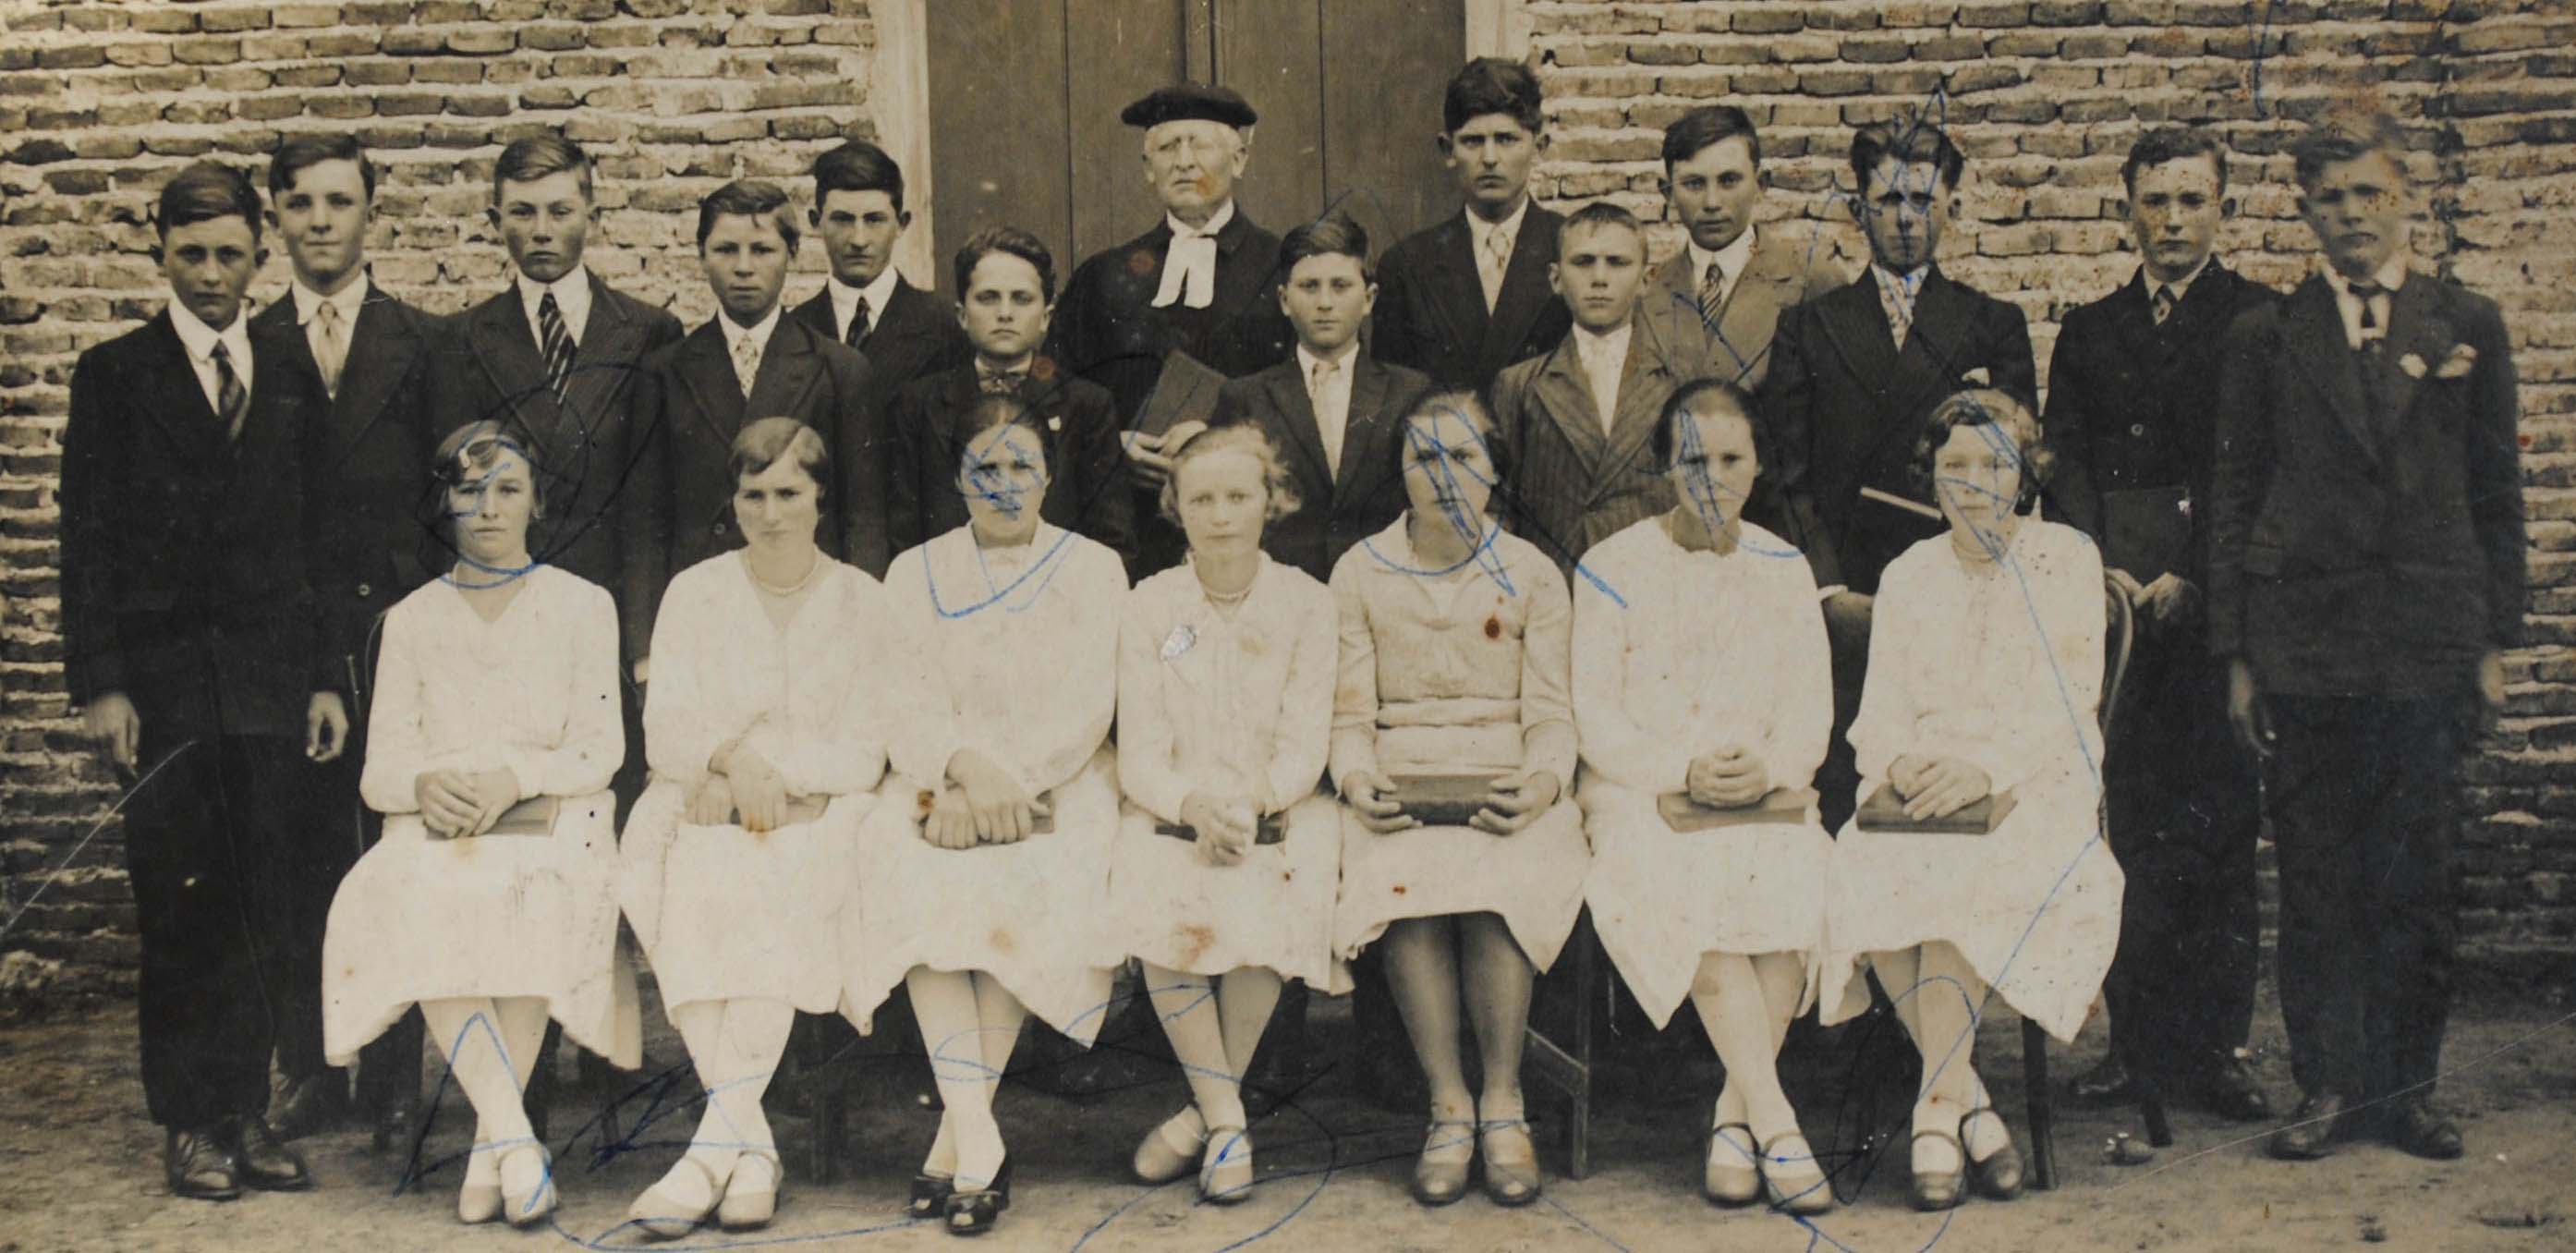 Confirmation class (1931) with Pastor Ernst Lang. Source: Leandro Hildt